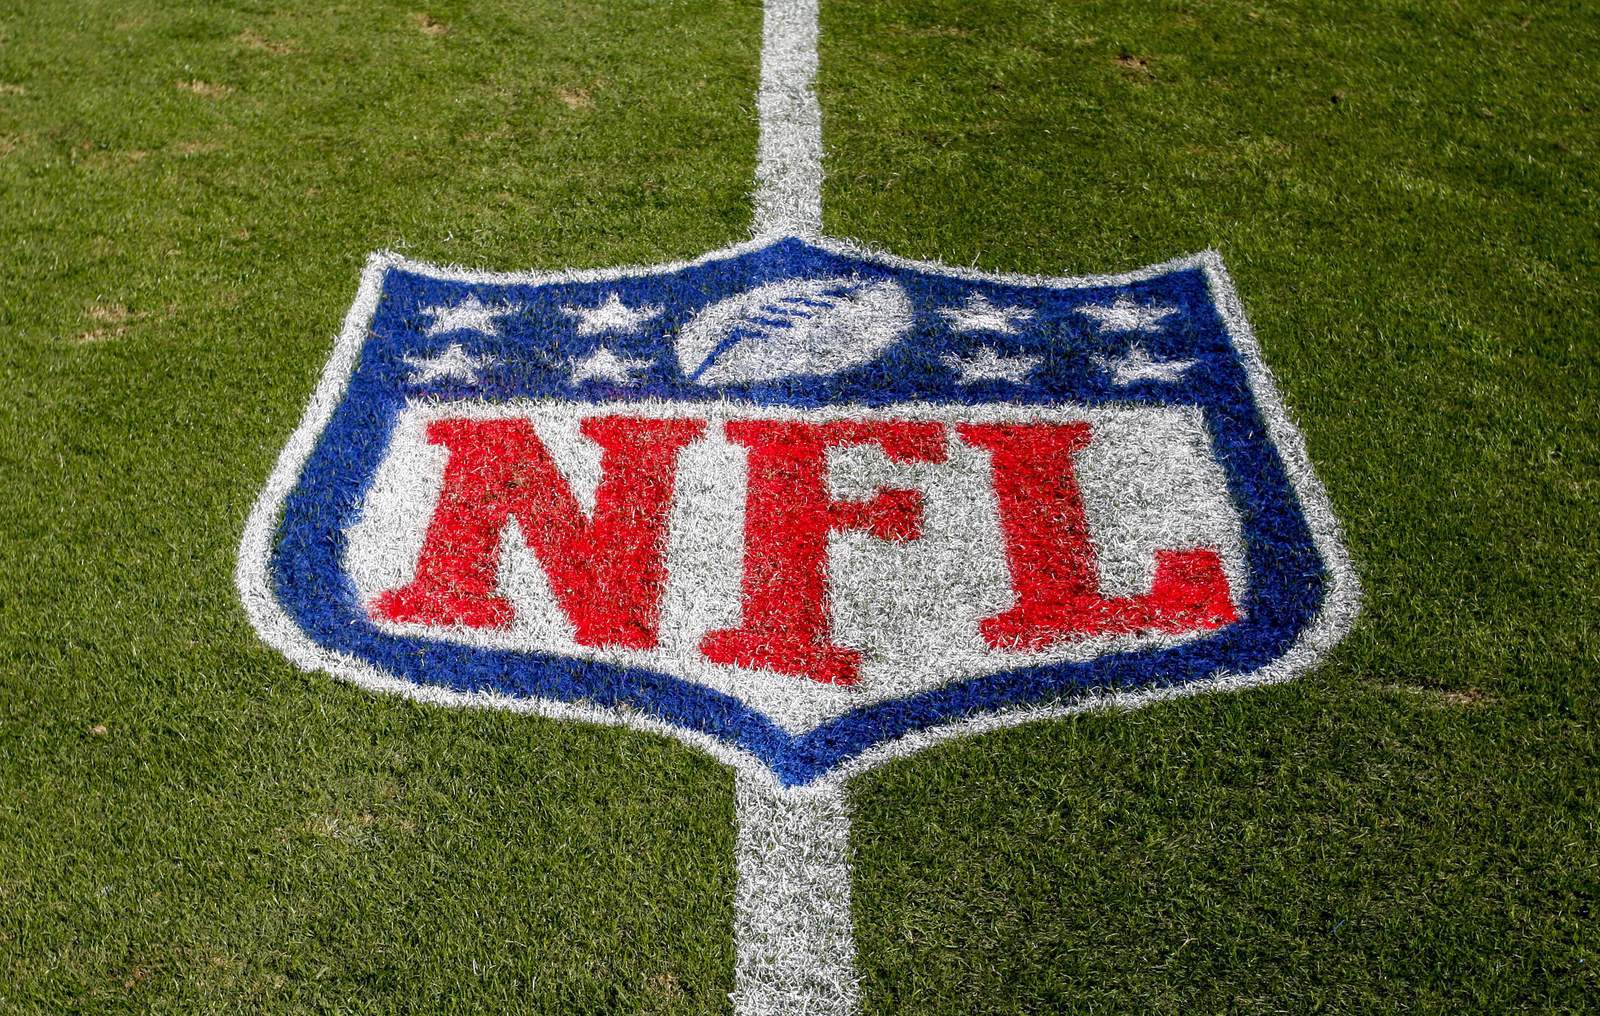 Some NFL teams skipping offseason practices amid pandemic